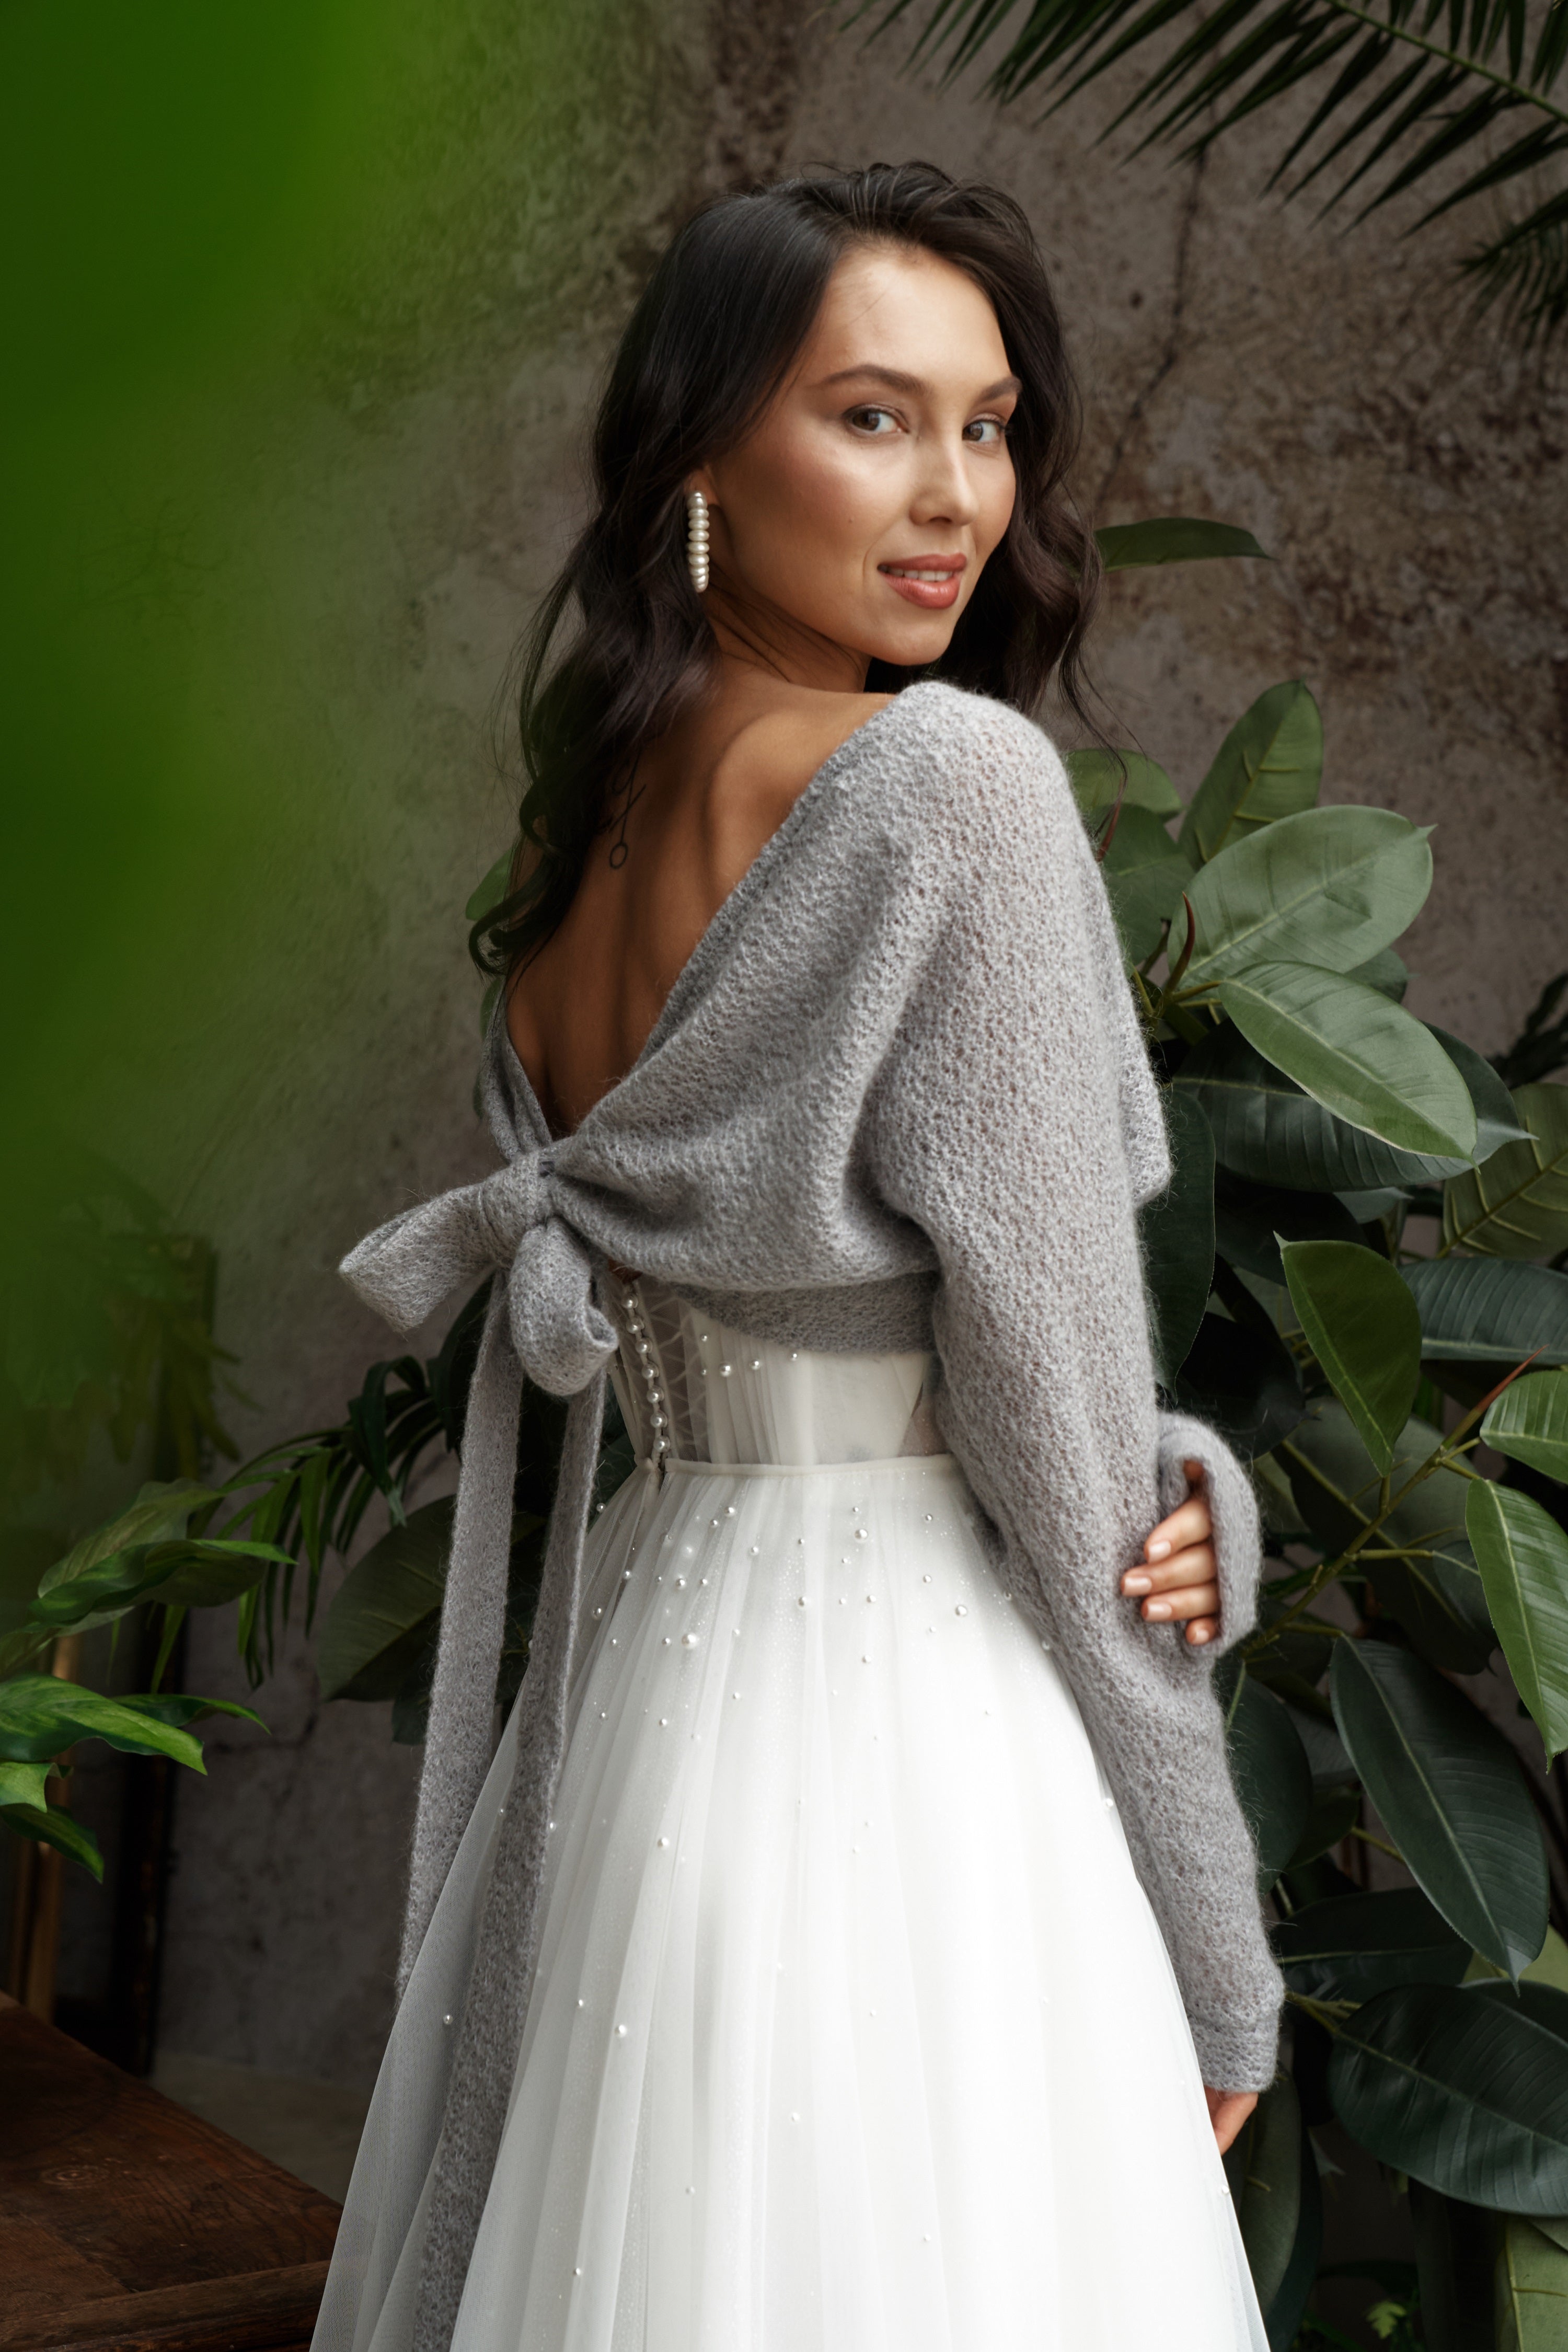 Bridal cardigan for wedding dress. Wool wedding sweater with ties in grey color.